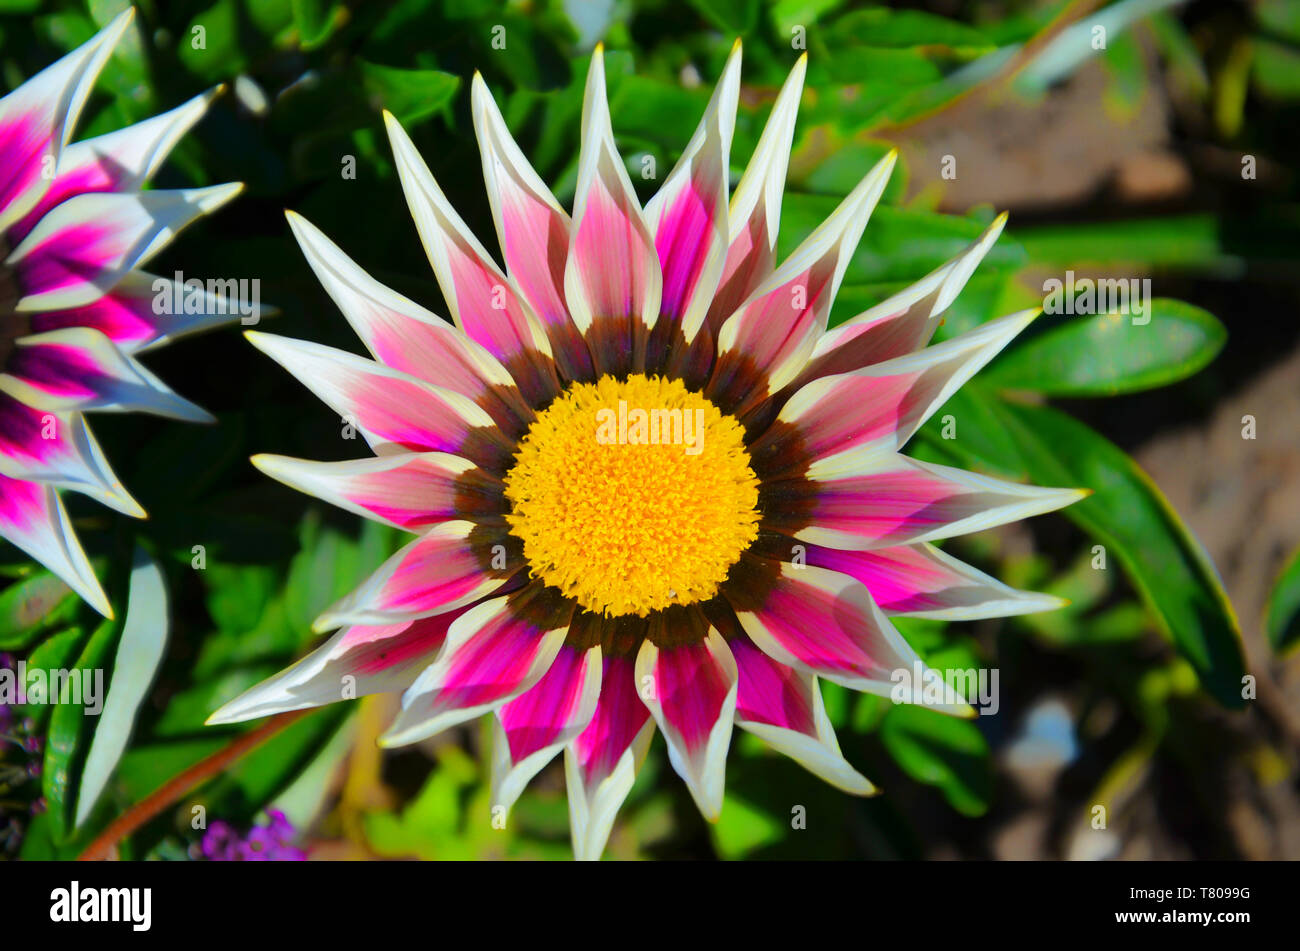 Gazania linearis with pink and white leaves and yellow center closeup. Gazania, known also as treasure flower, is native to southern Africa. The species typically grows on grassy and rocky hillsides. Stock Photo